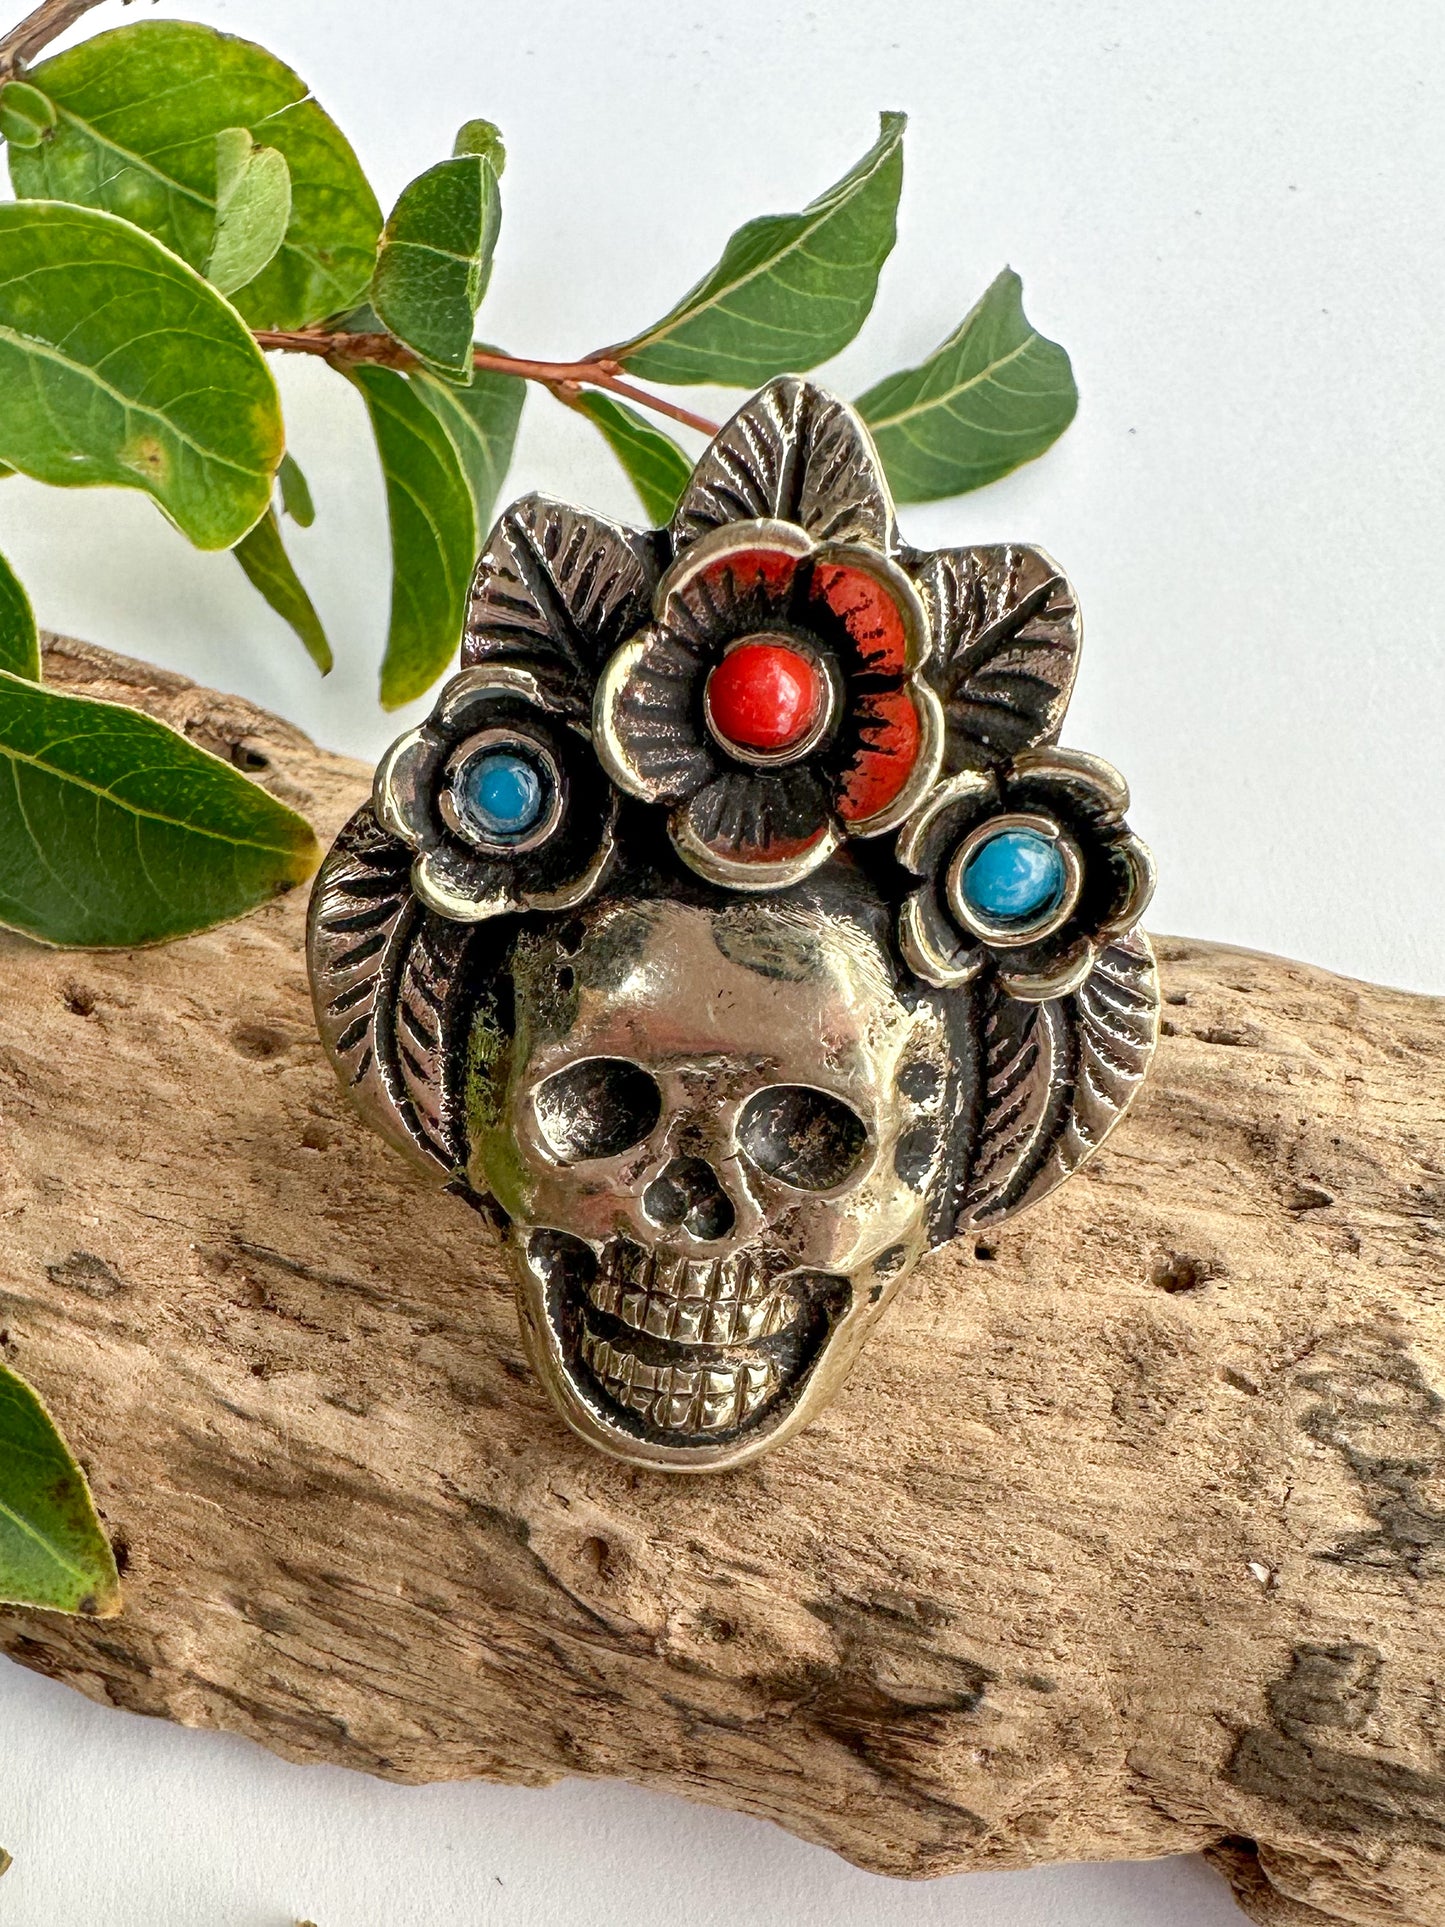 Load image into Gallery viewer, The Sugar Skull Ring - SpiritedBoutiques Boho Hippie Boutique Style Ring, Dorjee Design Inc.
